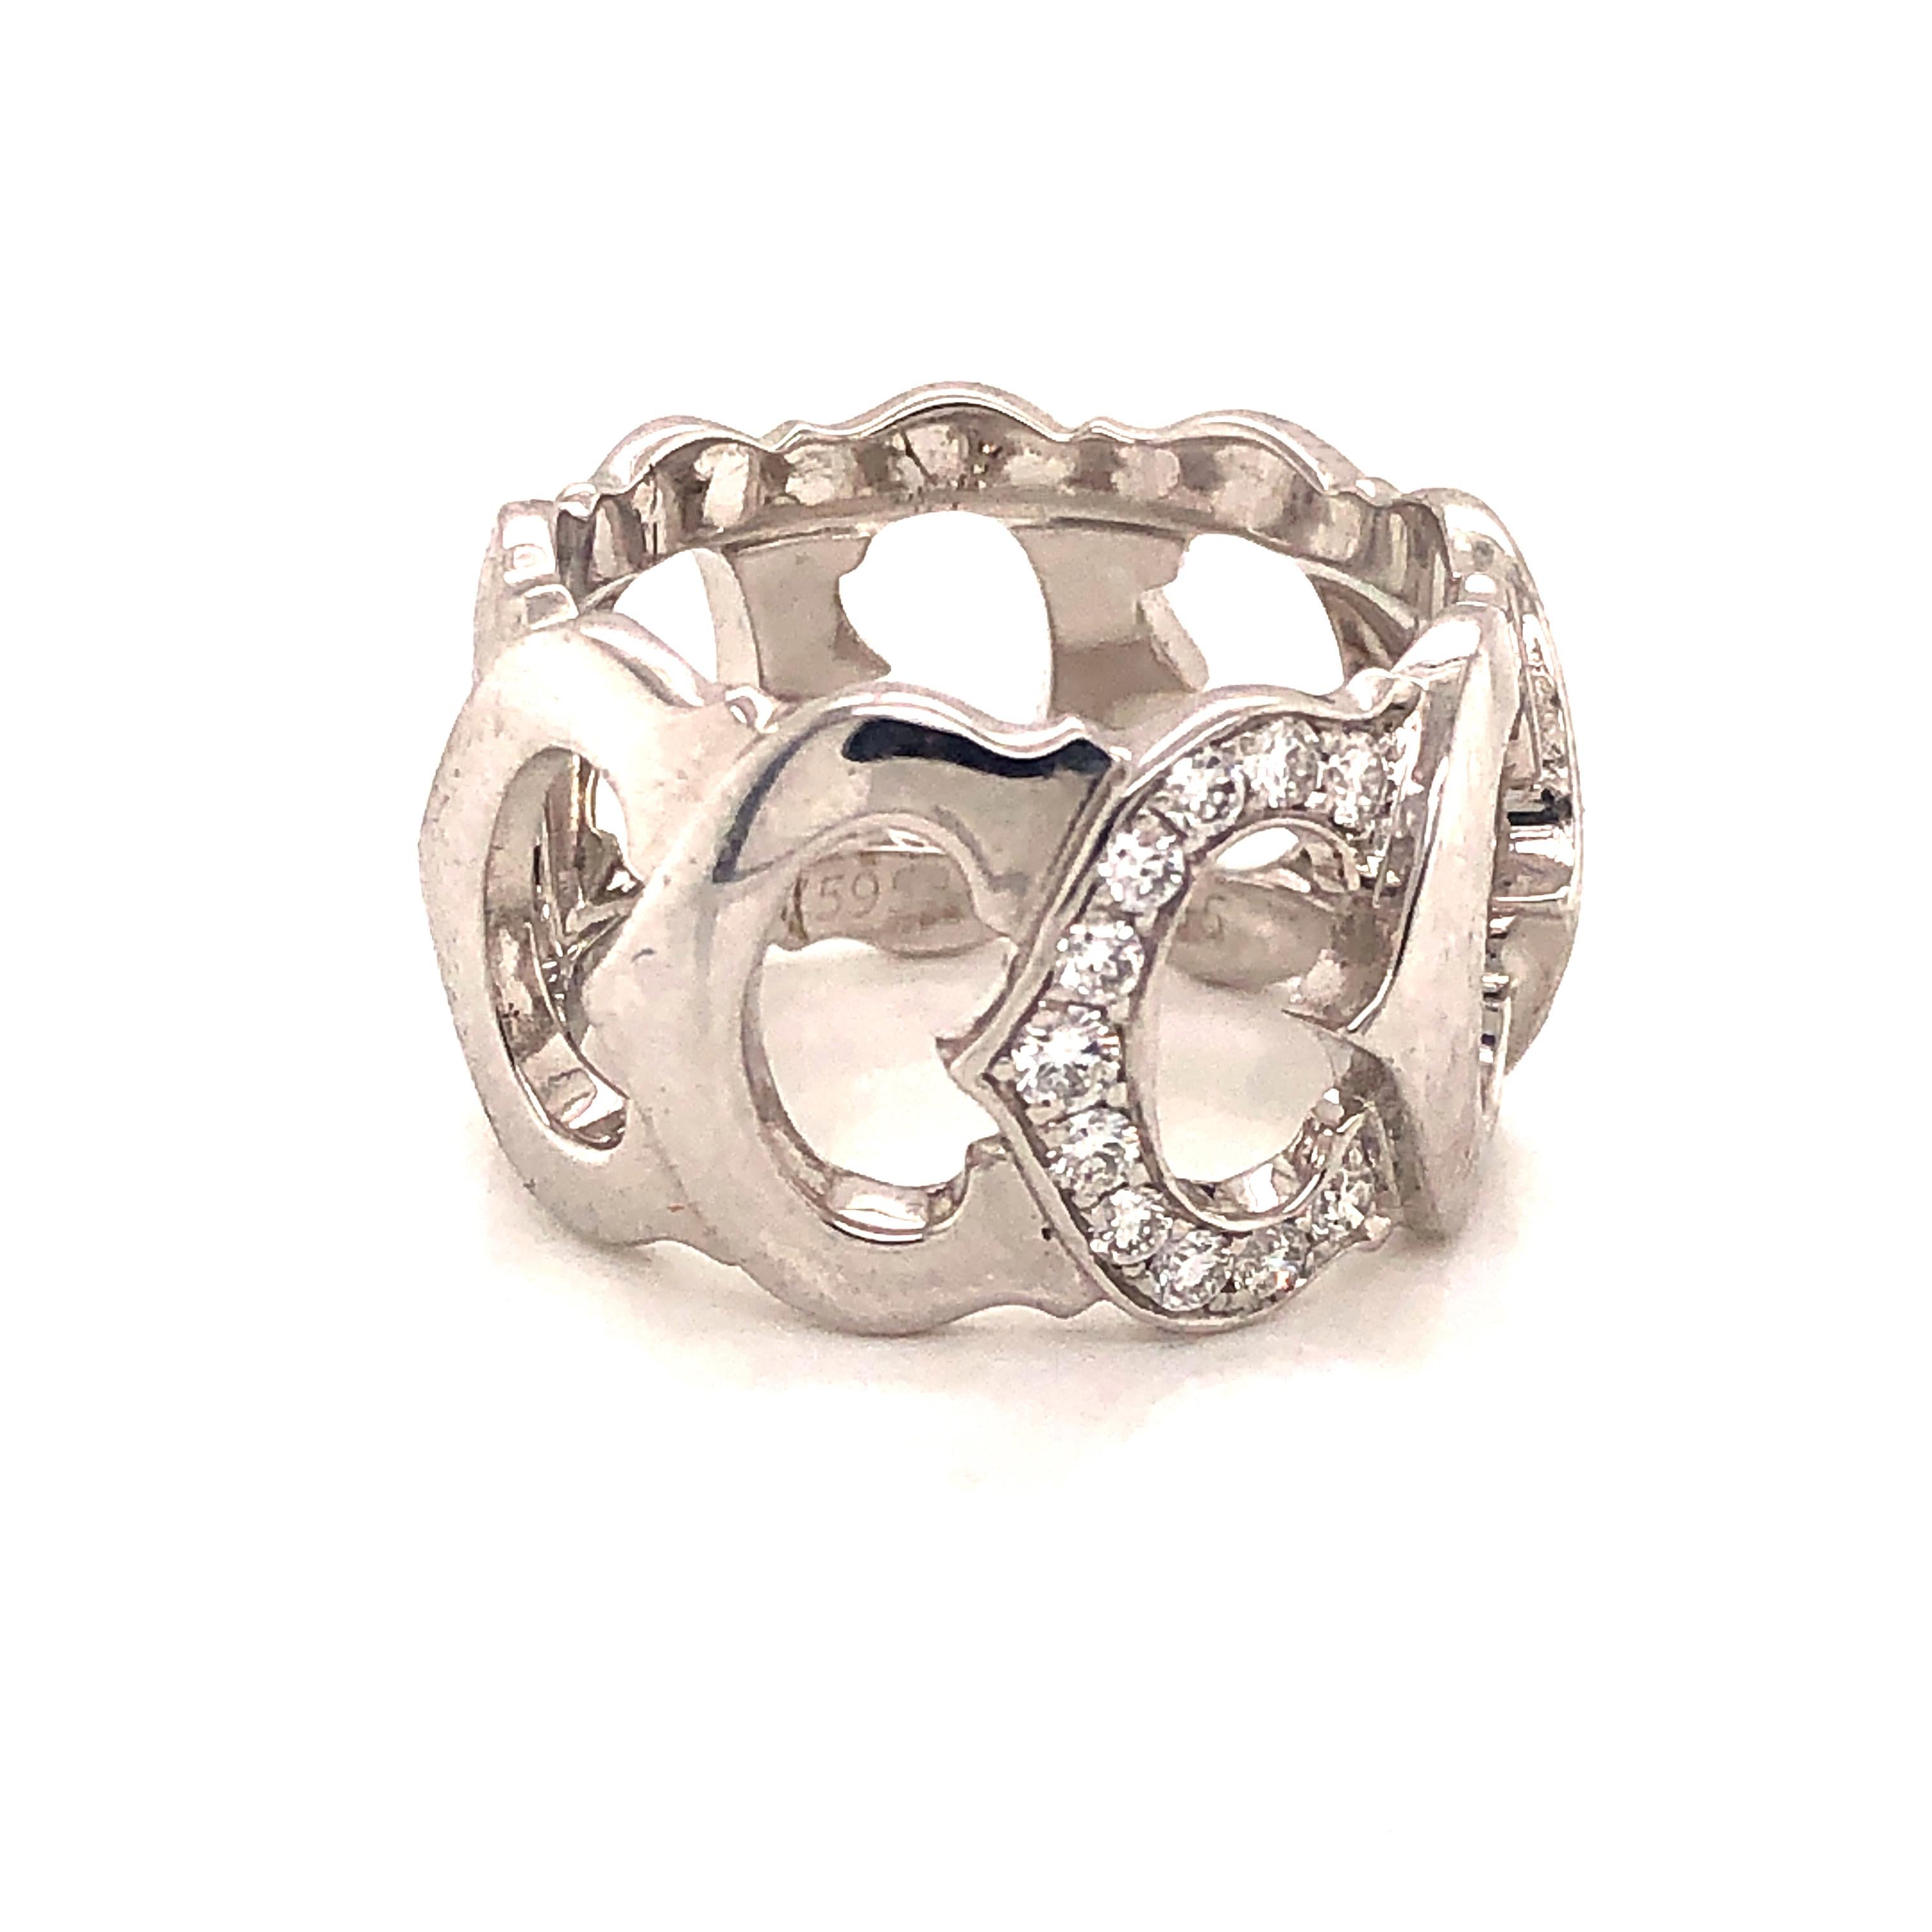 Cartier White Gold Diamond C Logo Ring size 55 or 7.25. The ring is crafted of 18 karat white gold and features a band of C motifs with a single center C set with round brilliant cut diamonds weighing approximately .20 total carat weight. This is a